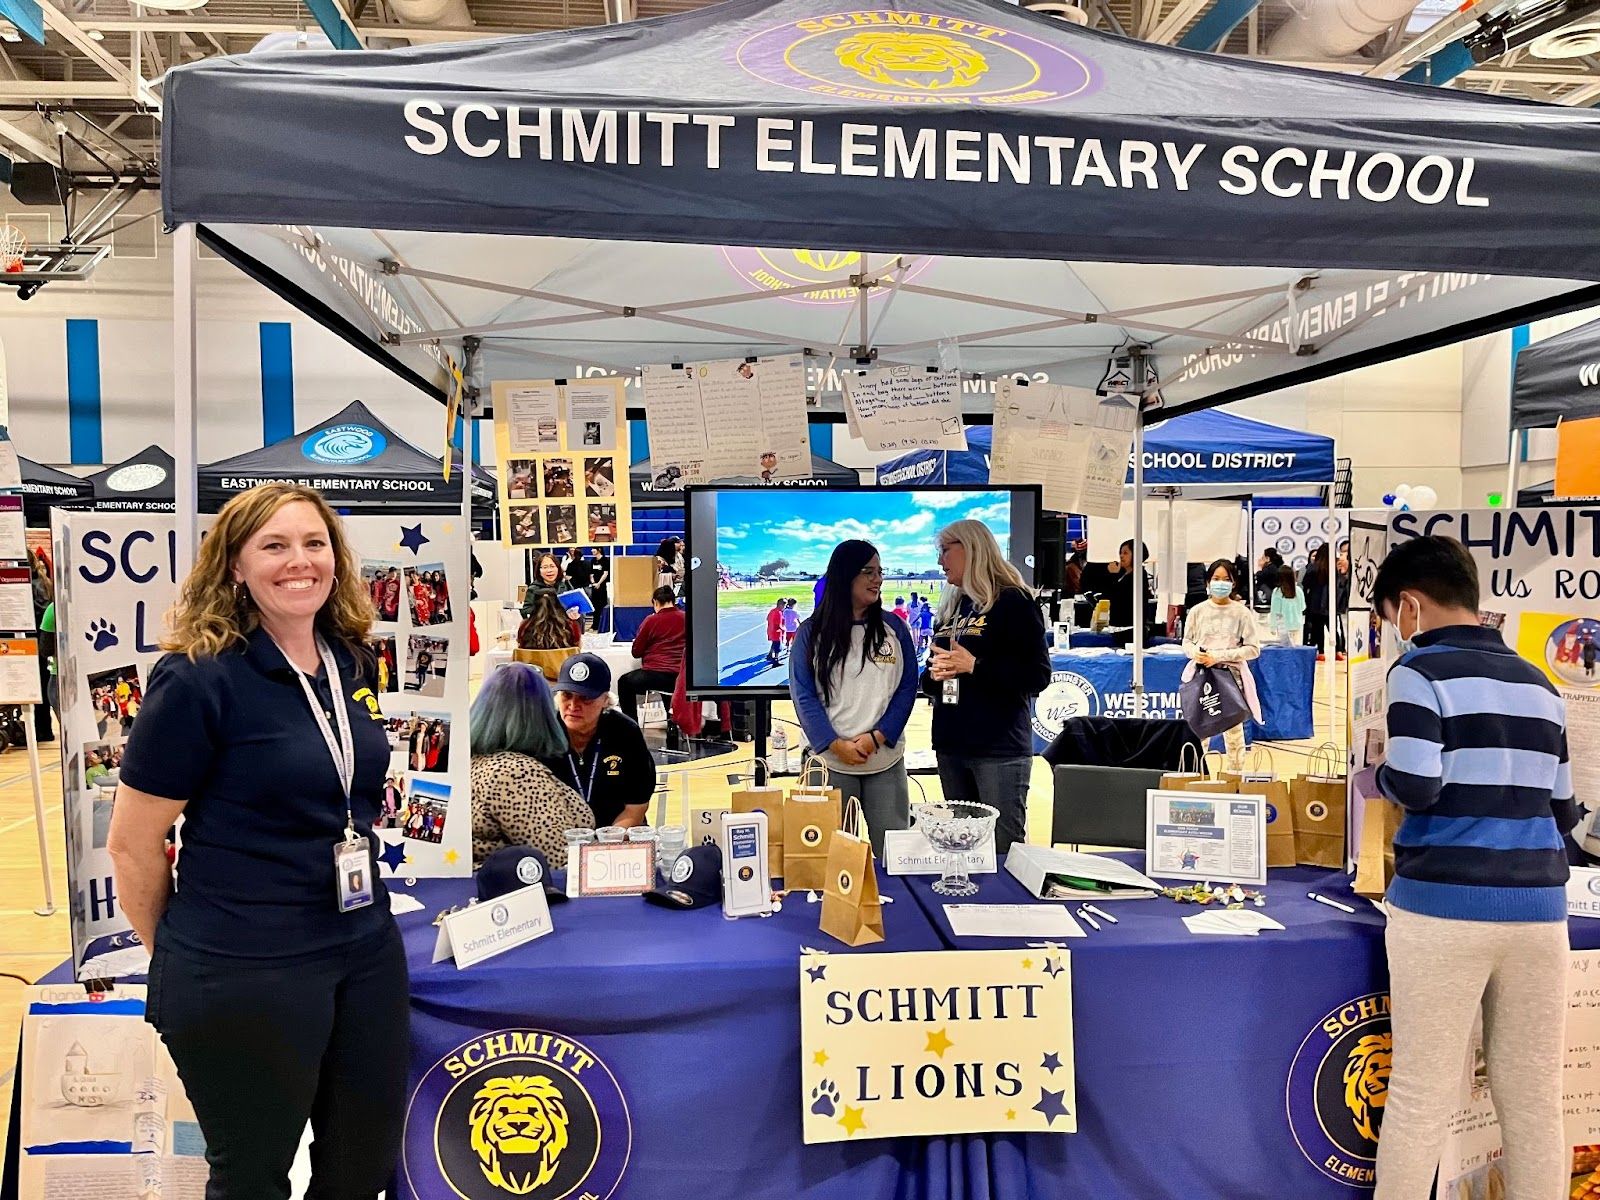 Schmitt Elementary School Principal Sarah Nead-Rendon poses in front of her school's canopy at the Westminster School District's first Academic Innovation Showcase. Photo by Jeannette Andruss.